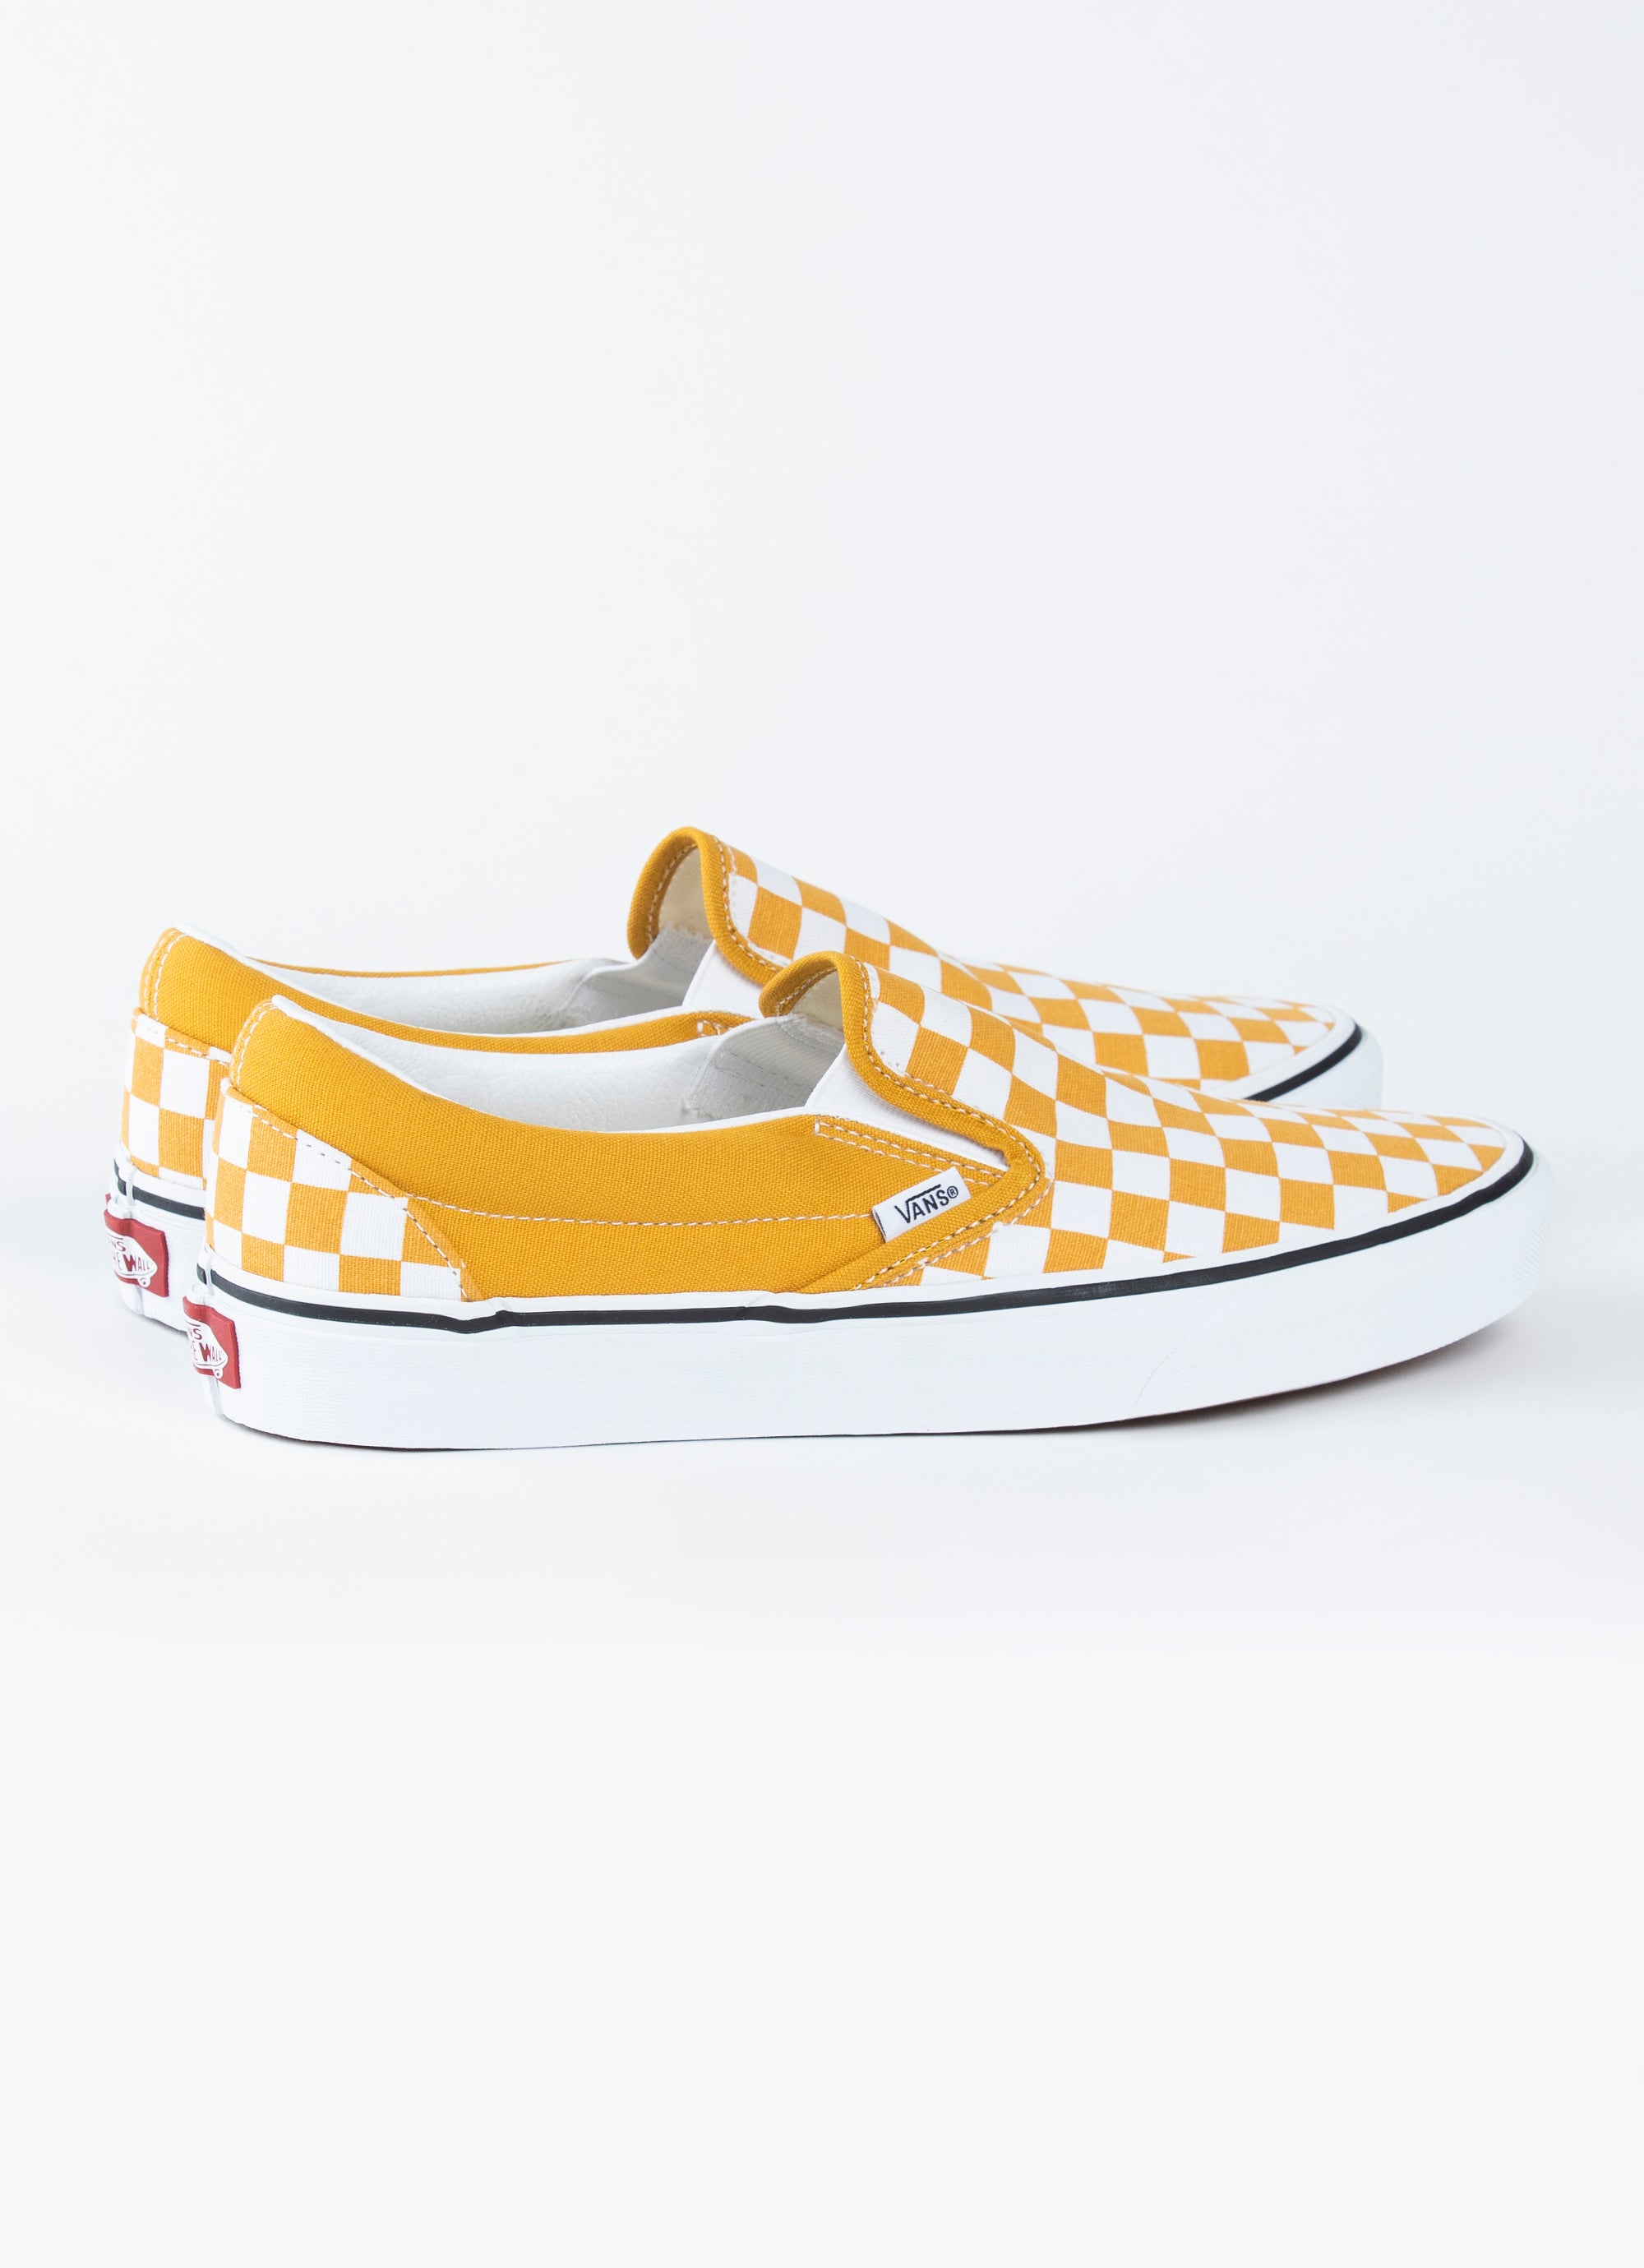 Vans Classic Slip-On Color Theory Checkerboard Shoe In Yellow | Red Rat